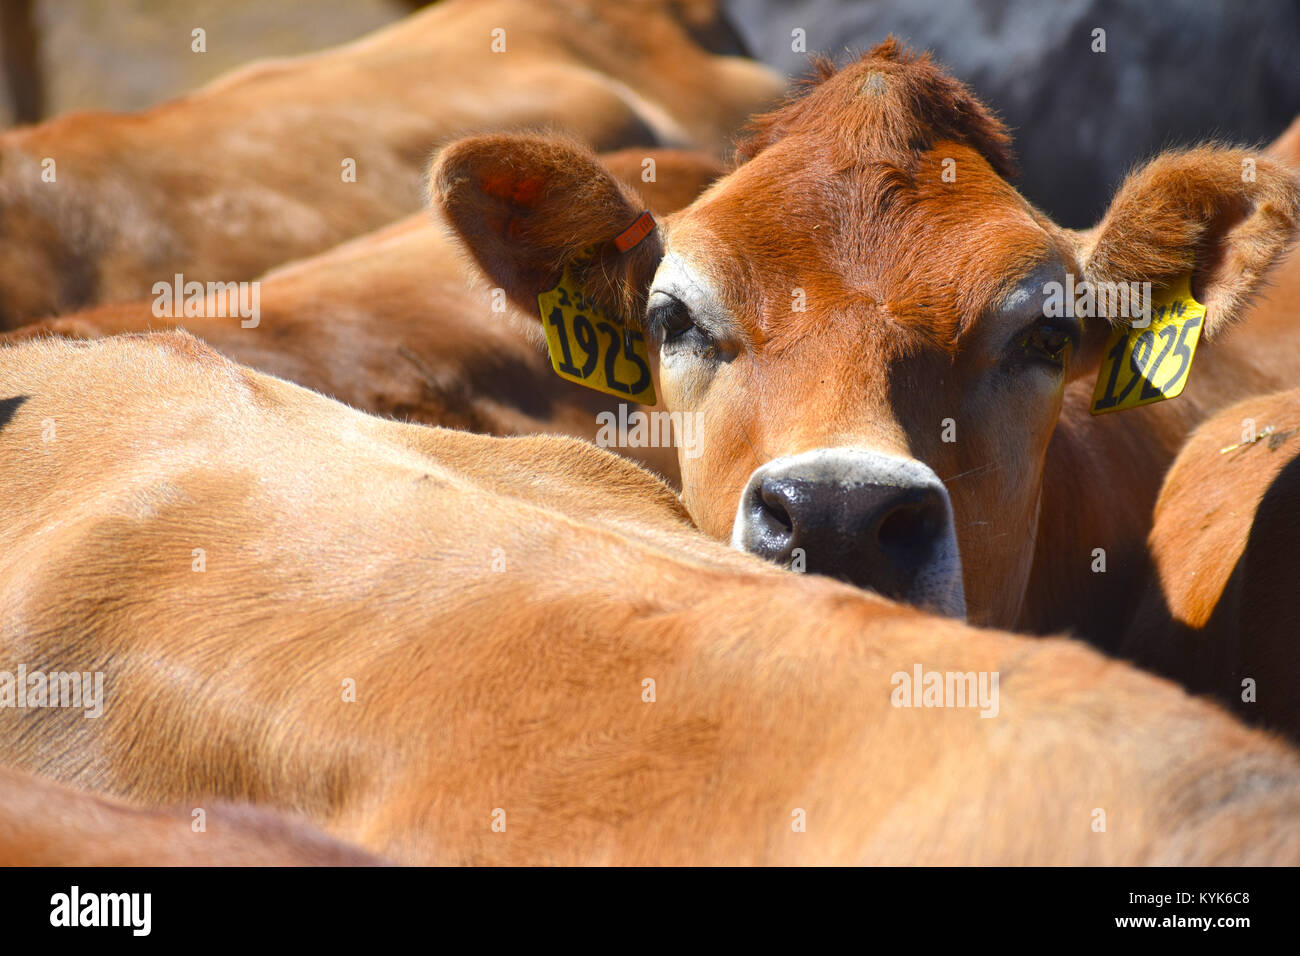 Cow caught in the middle of the herd at a cattle ranch. Stock Photo